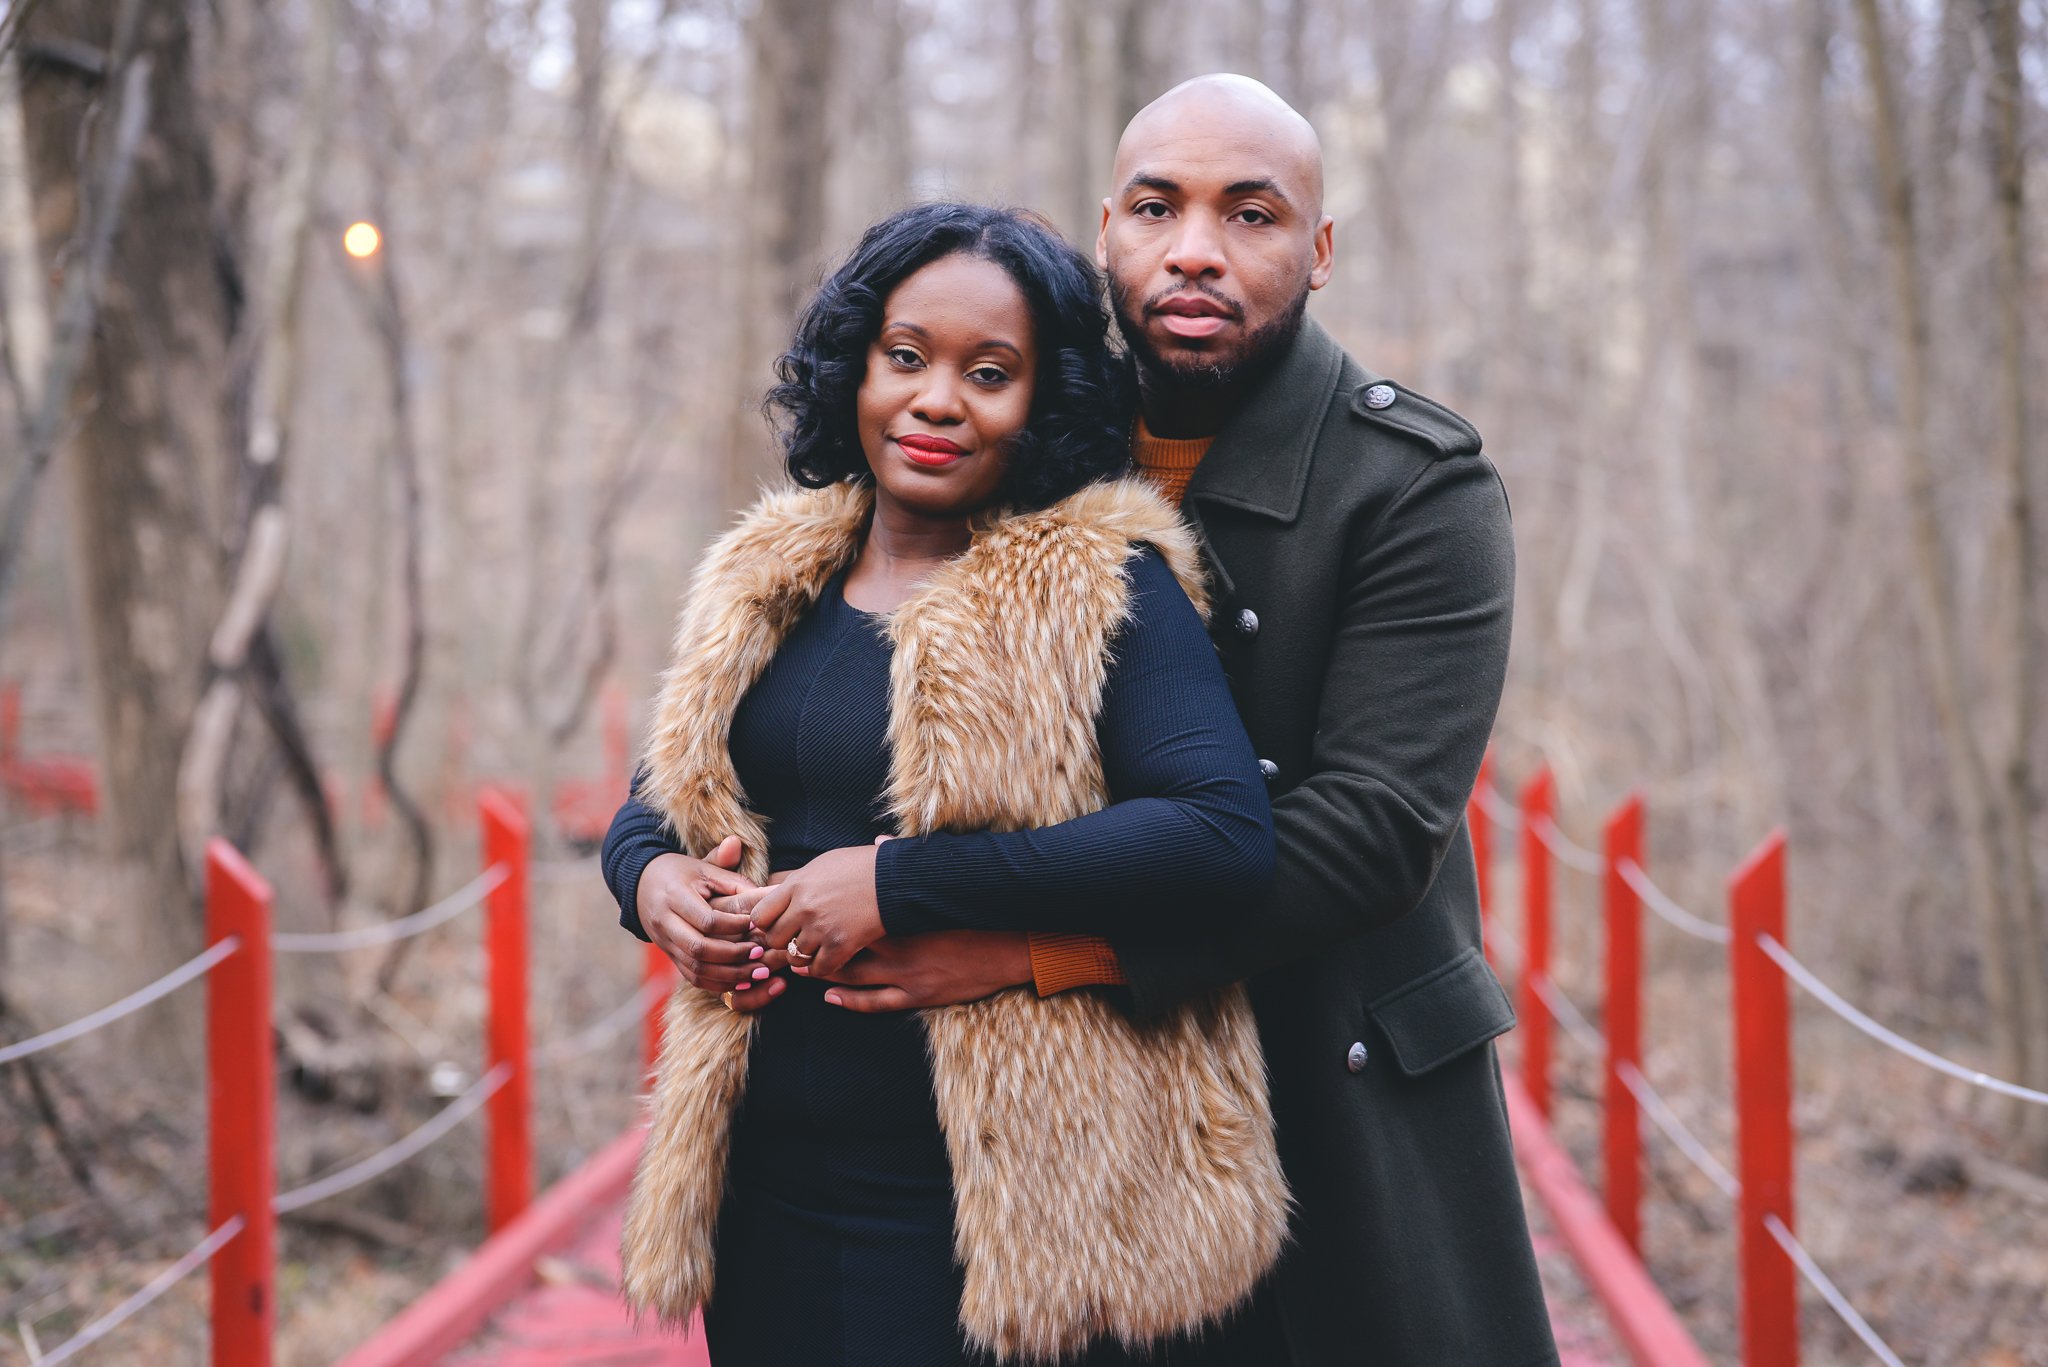 Engagement photo session in College Park, MD